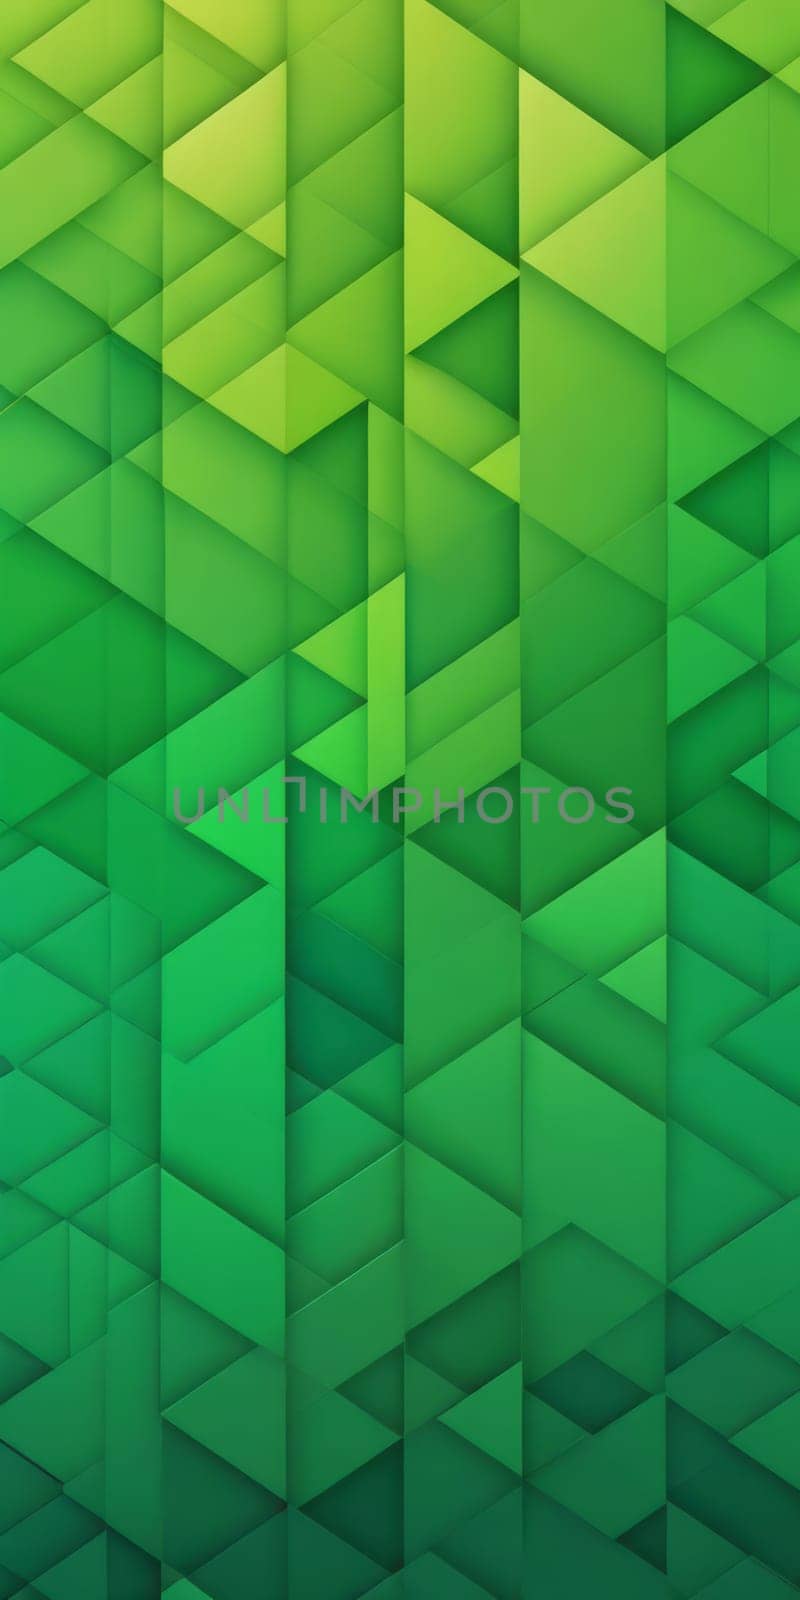 Tessellated Shapes in Green and Forest by nkotlyar